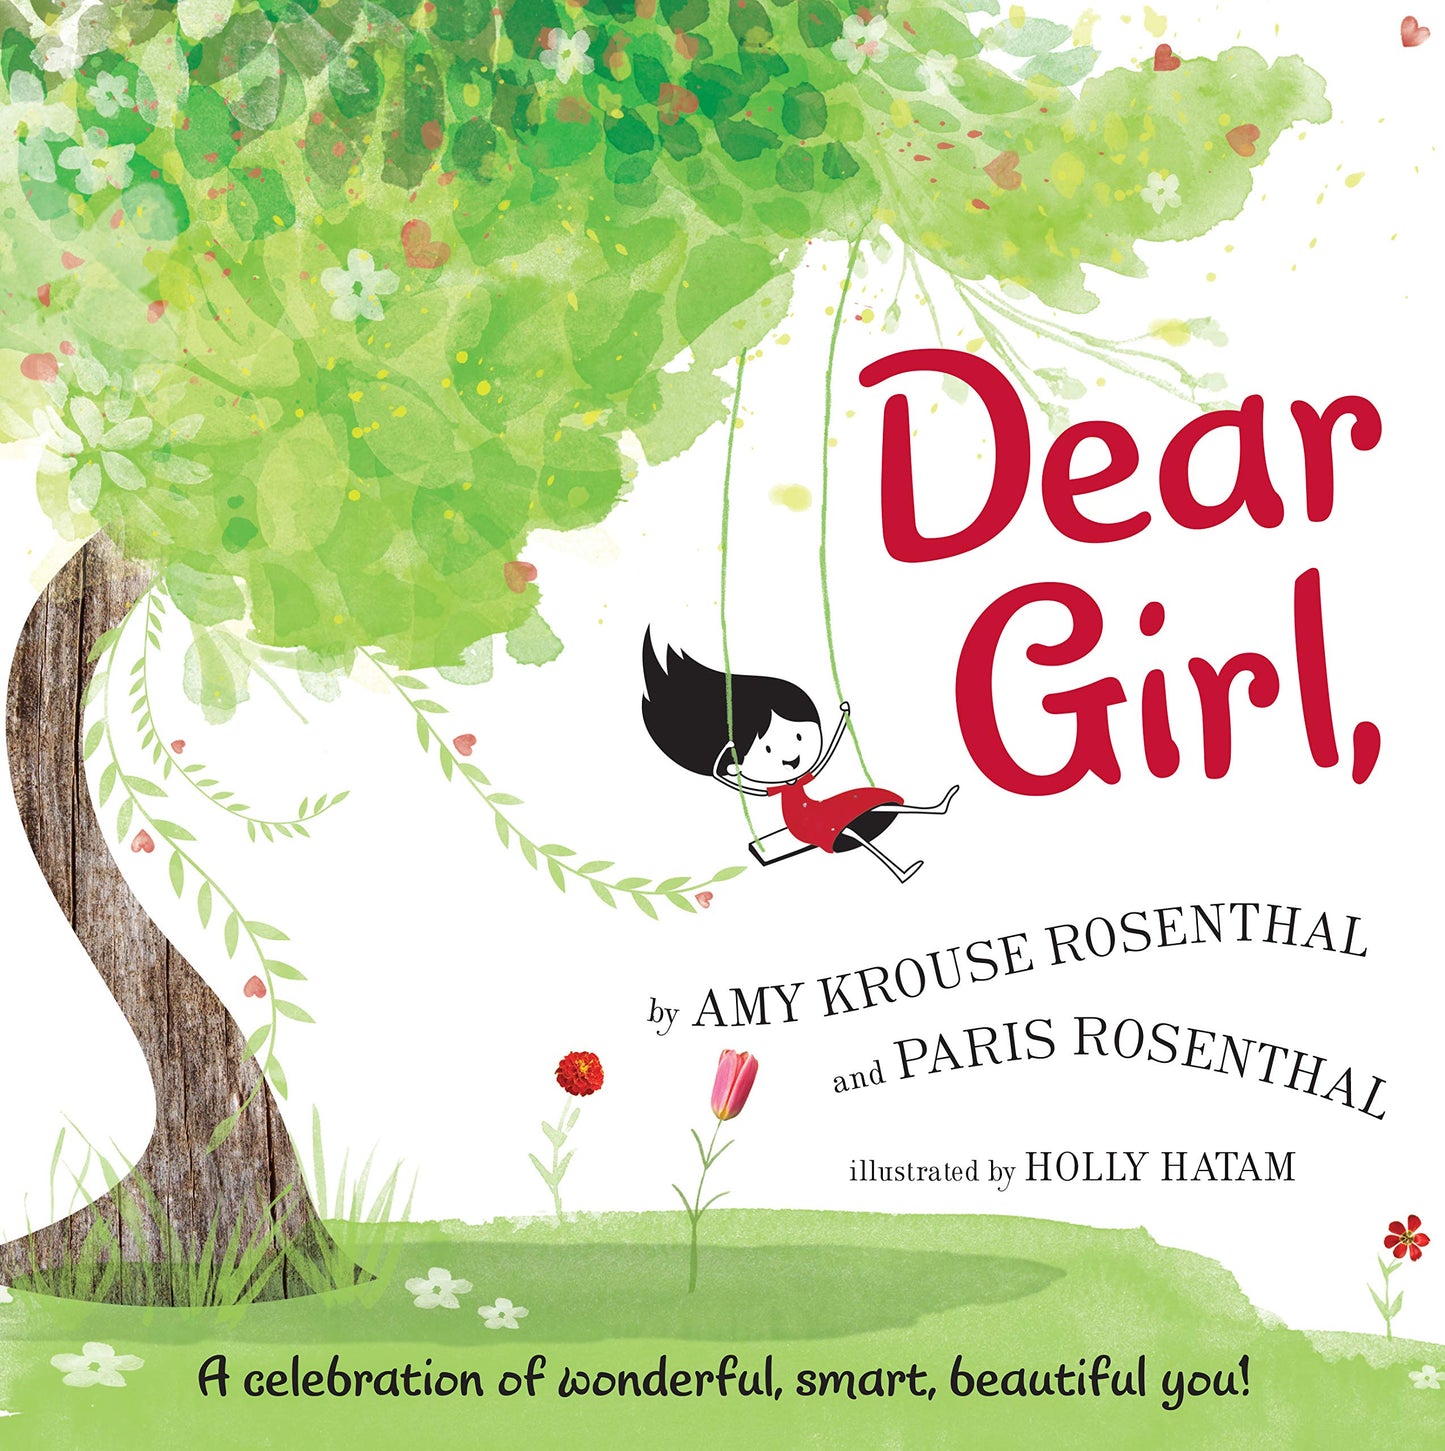 front of book has a tree with a girls swinging on it, title, authors name, and illustrators name